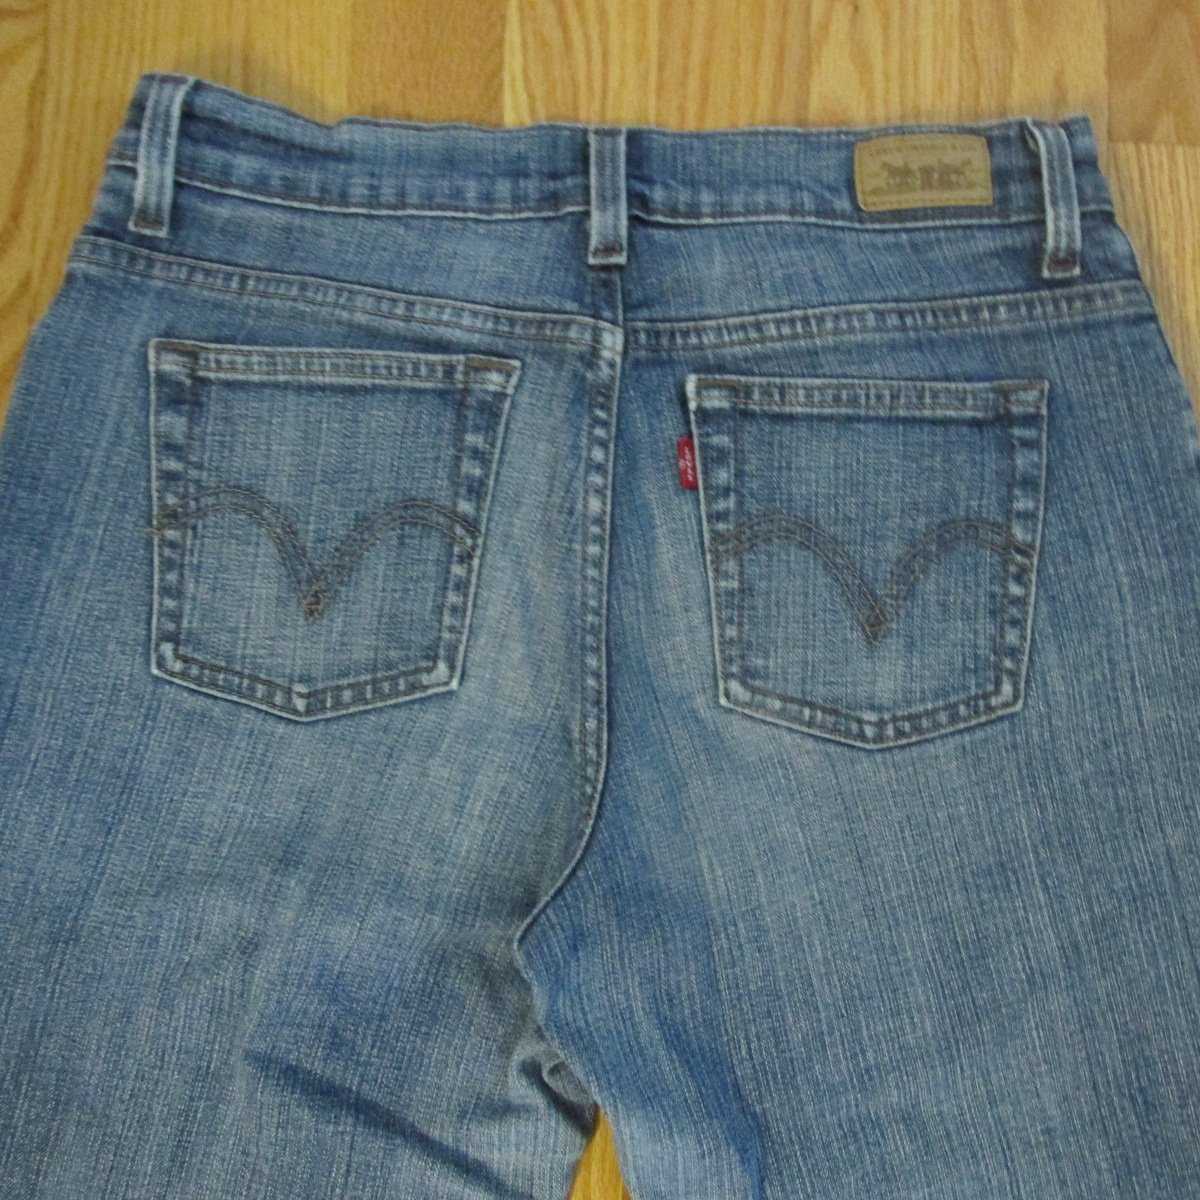 LEVI'S 550 WOMEN'S SIZE 6 M JEANS MED. BLUE DENIM RELAXED BOOT CUT ...